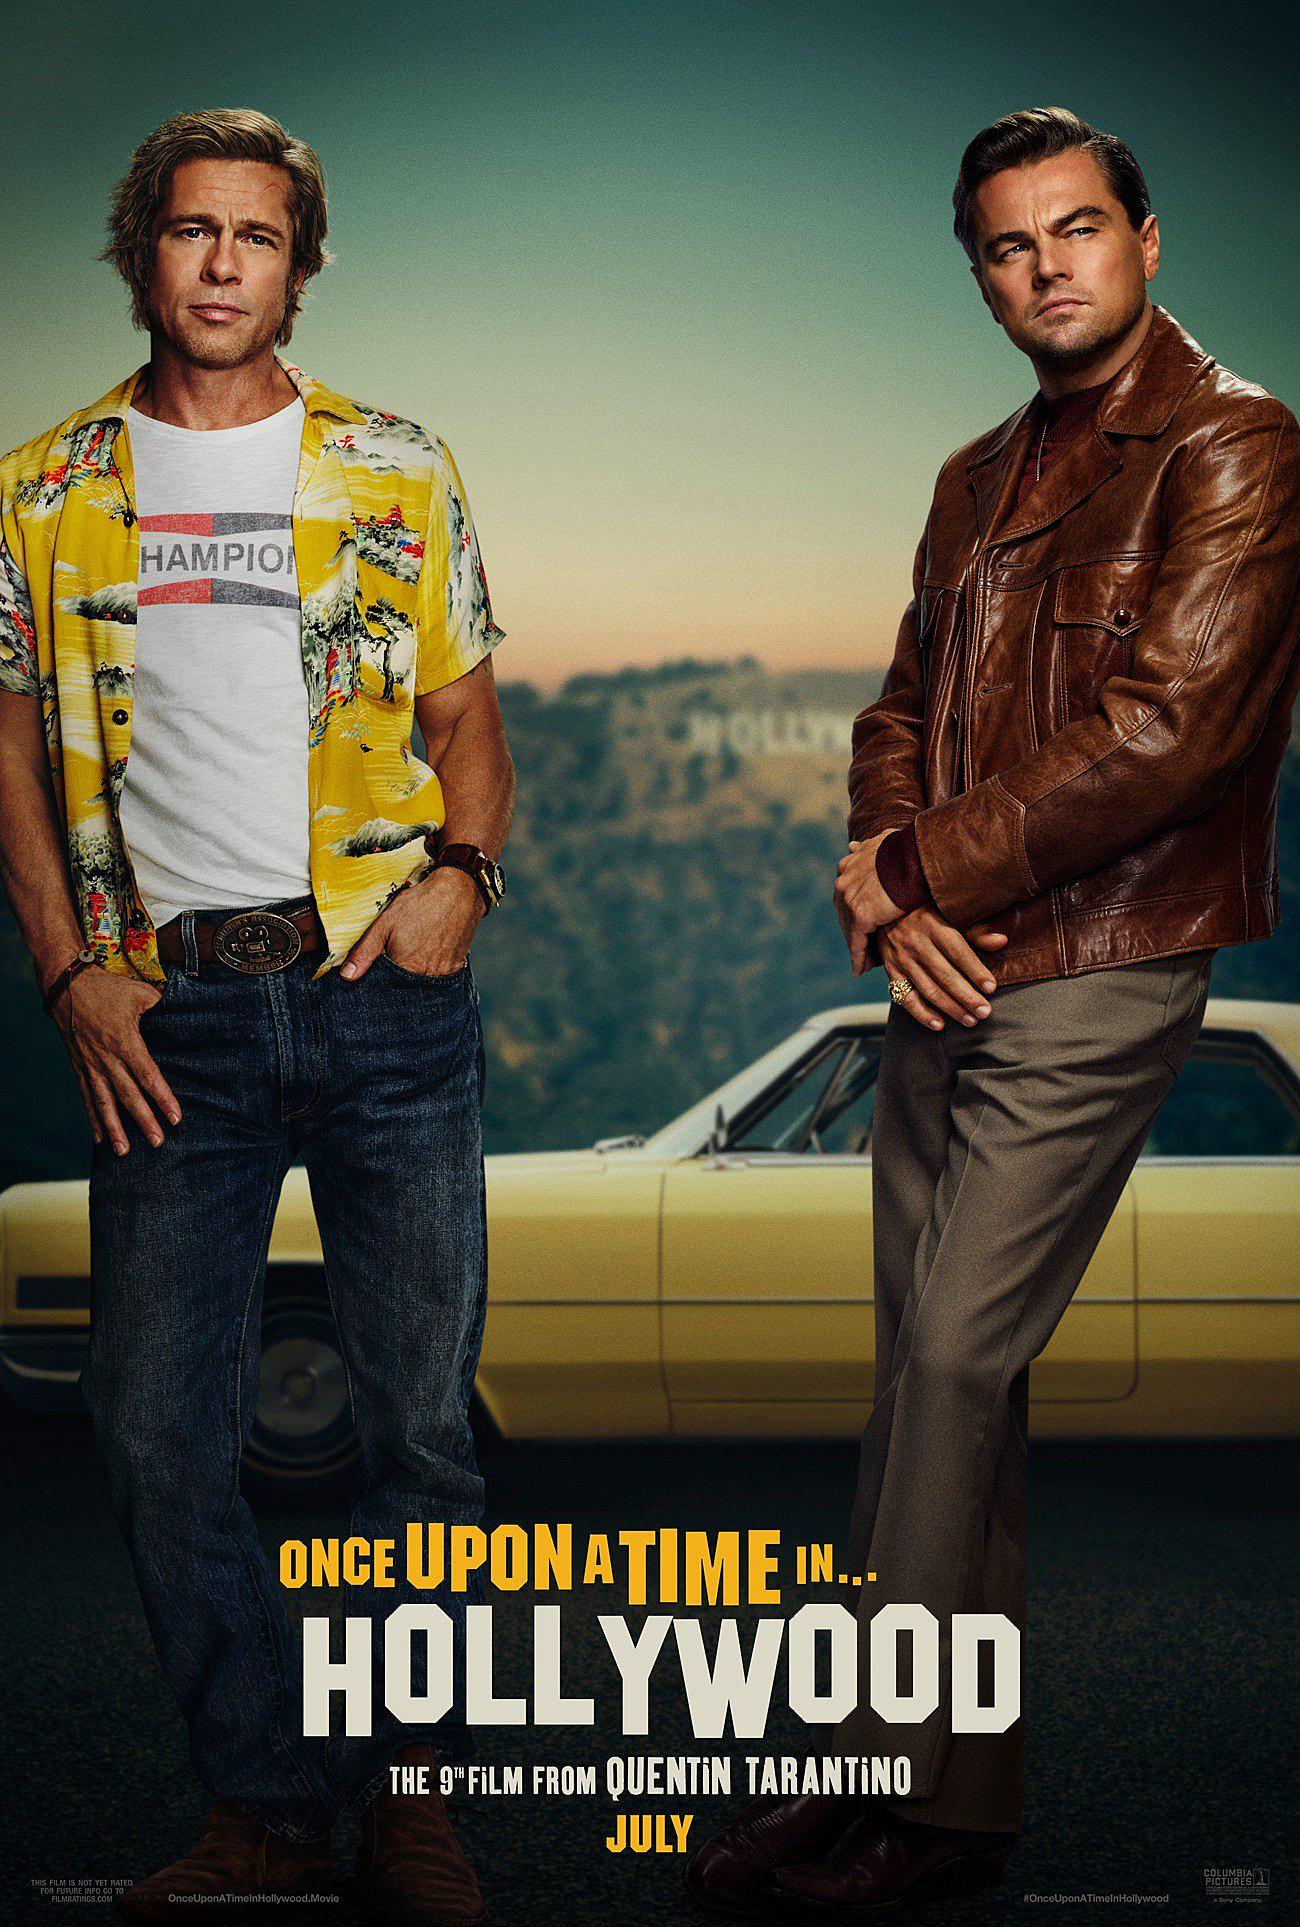 WATCH: Trailer and posters drop for Quentin Tarantino's Once Upon A Time… In Hollywood1300 x 1927